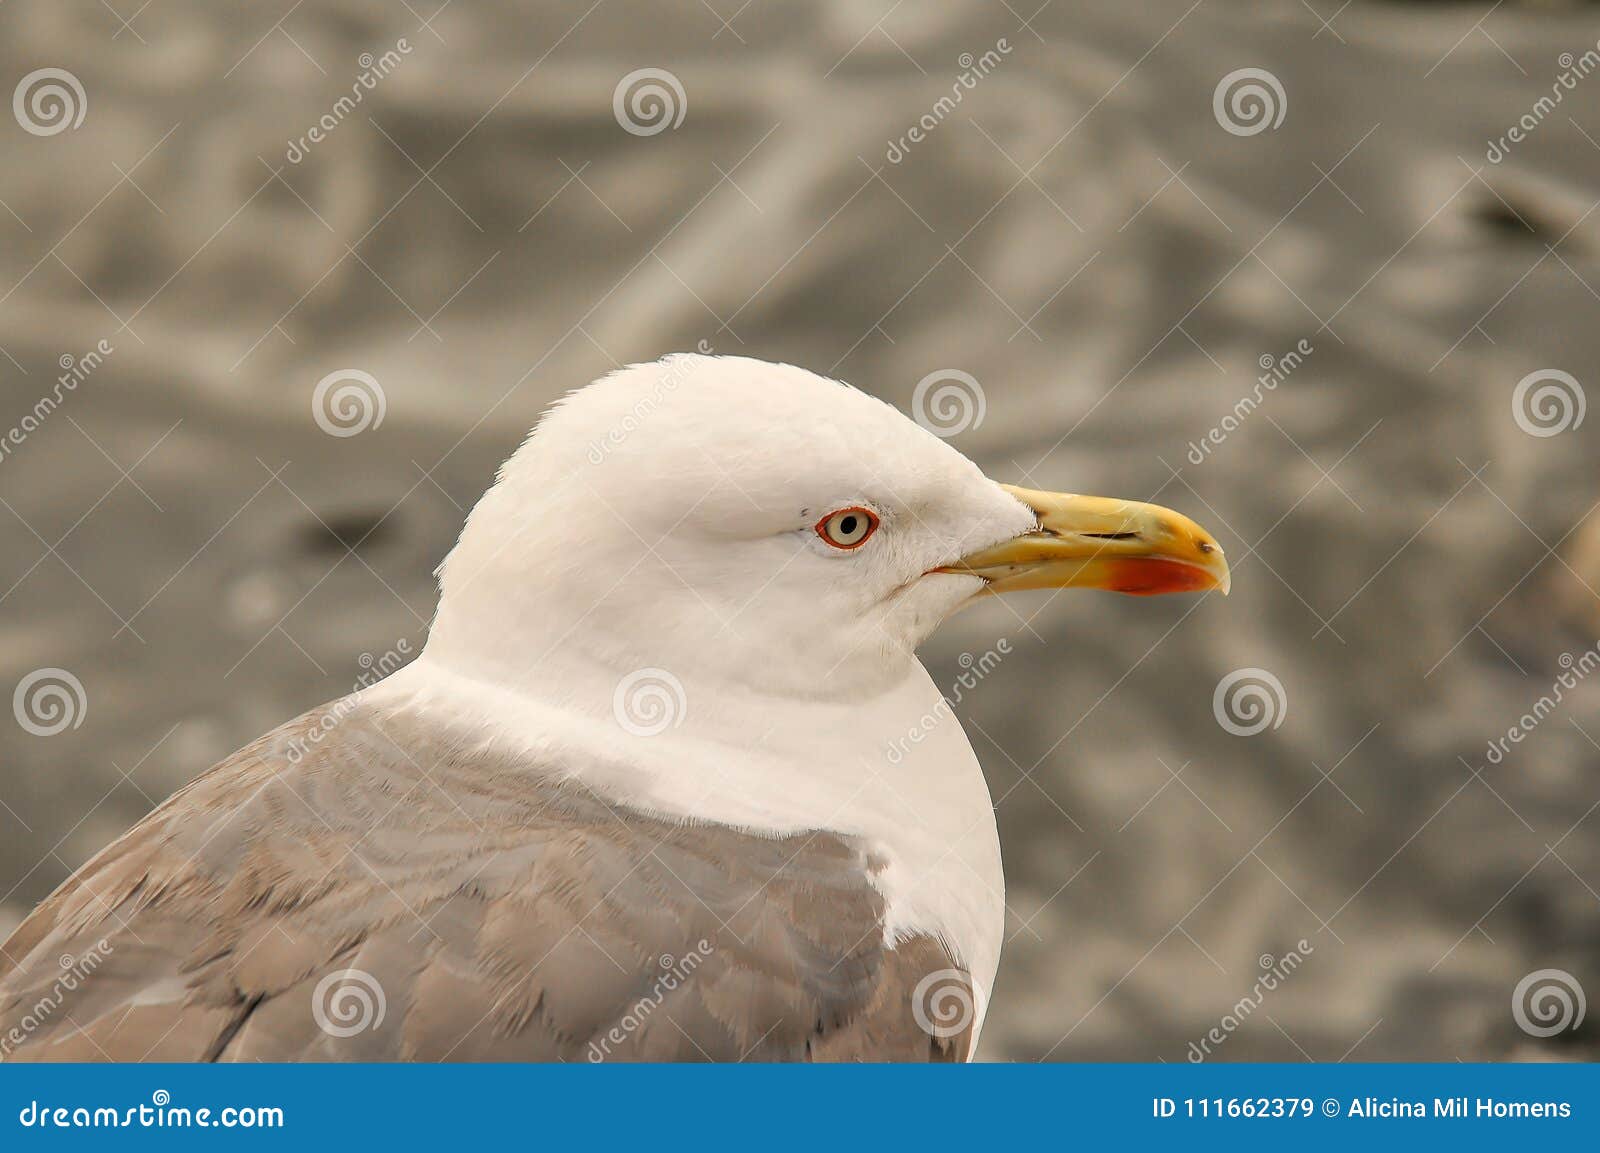 seagull in a relaxing moment